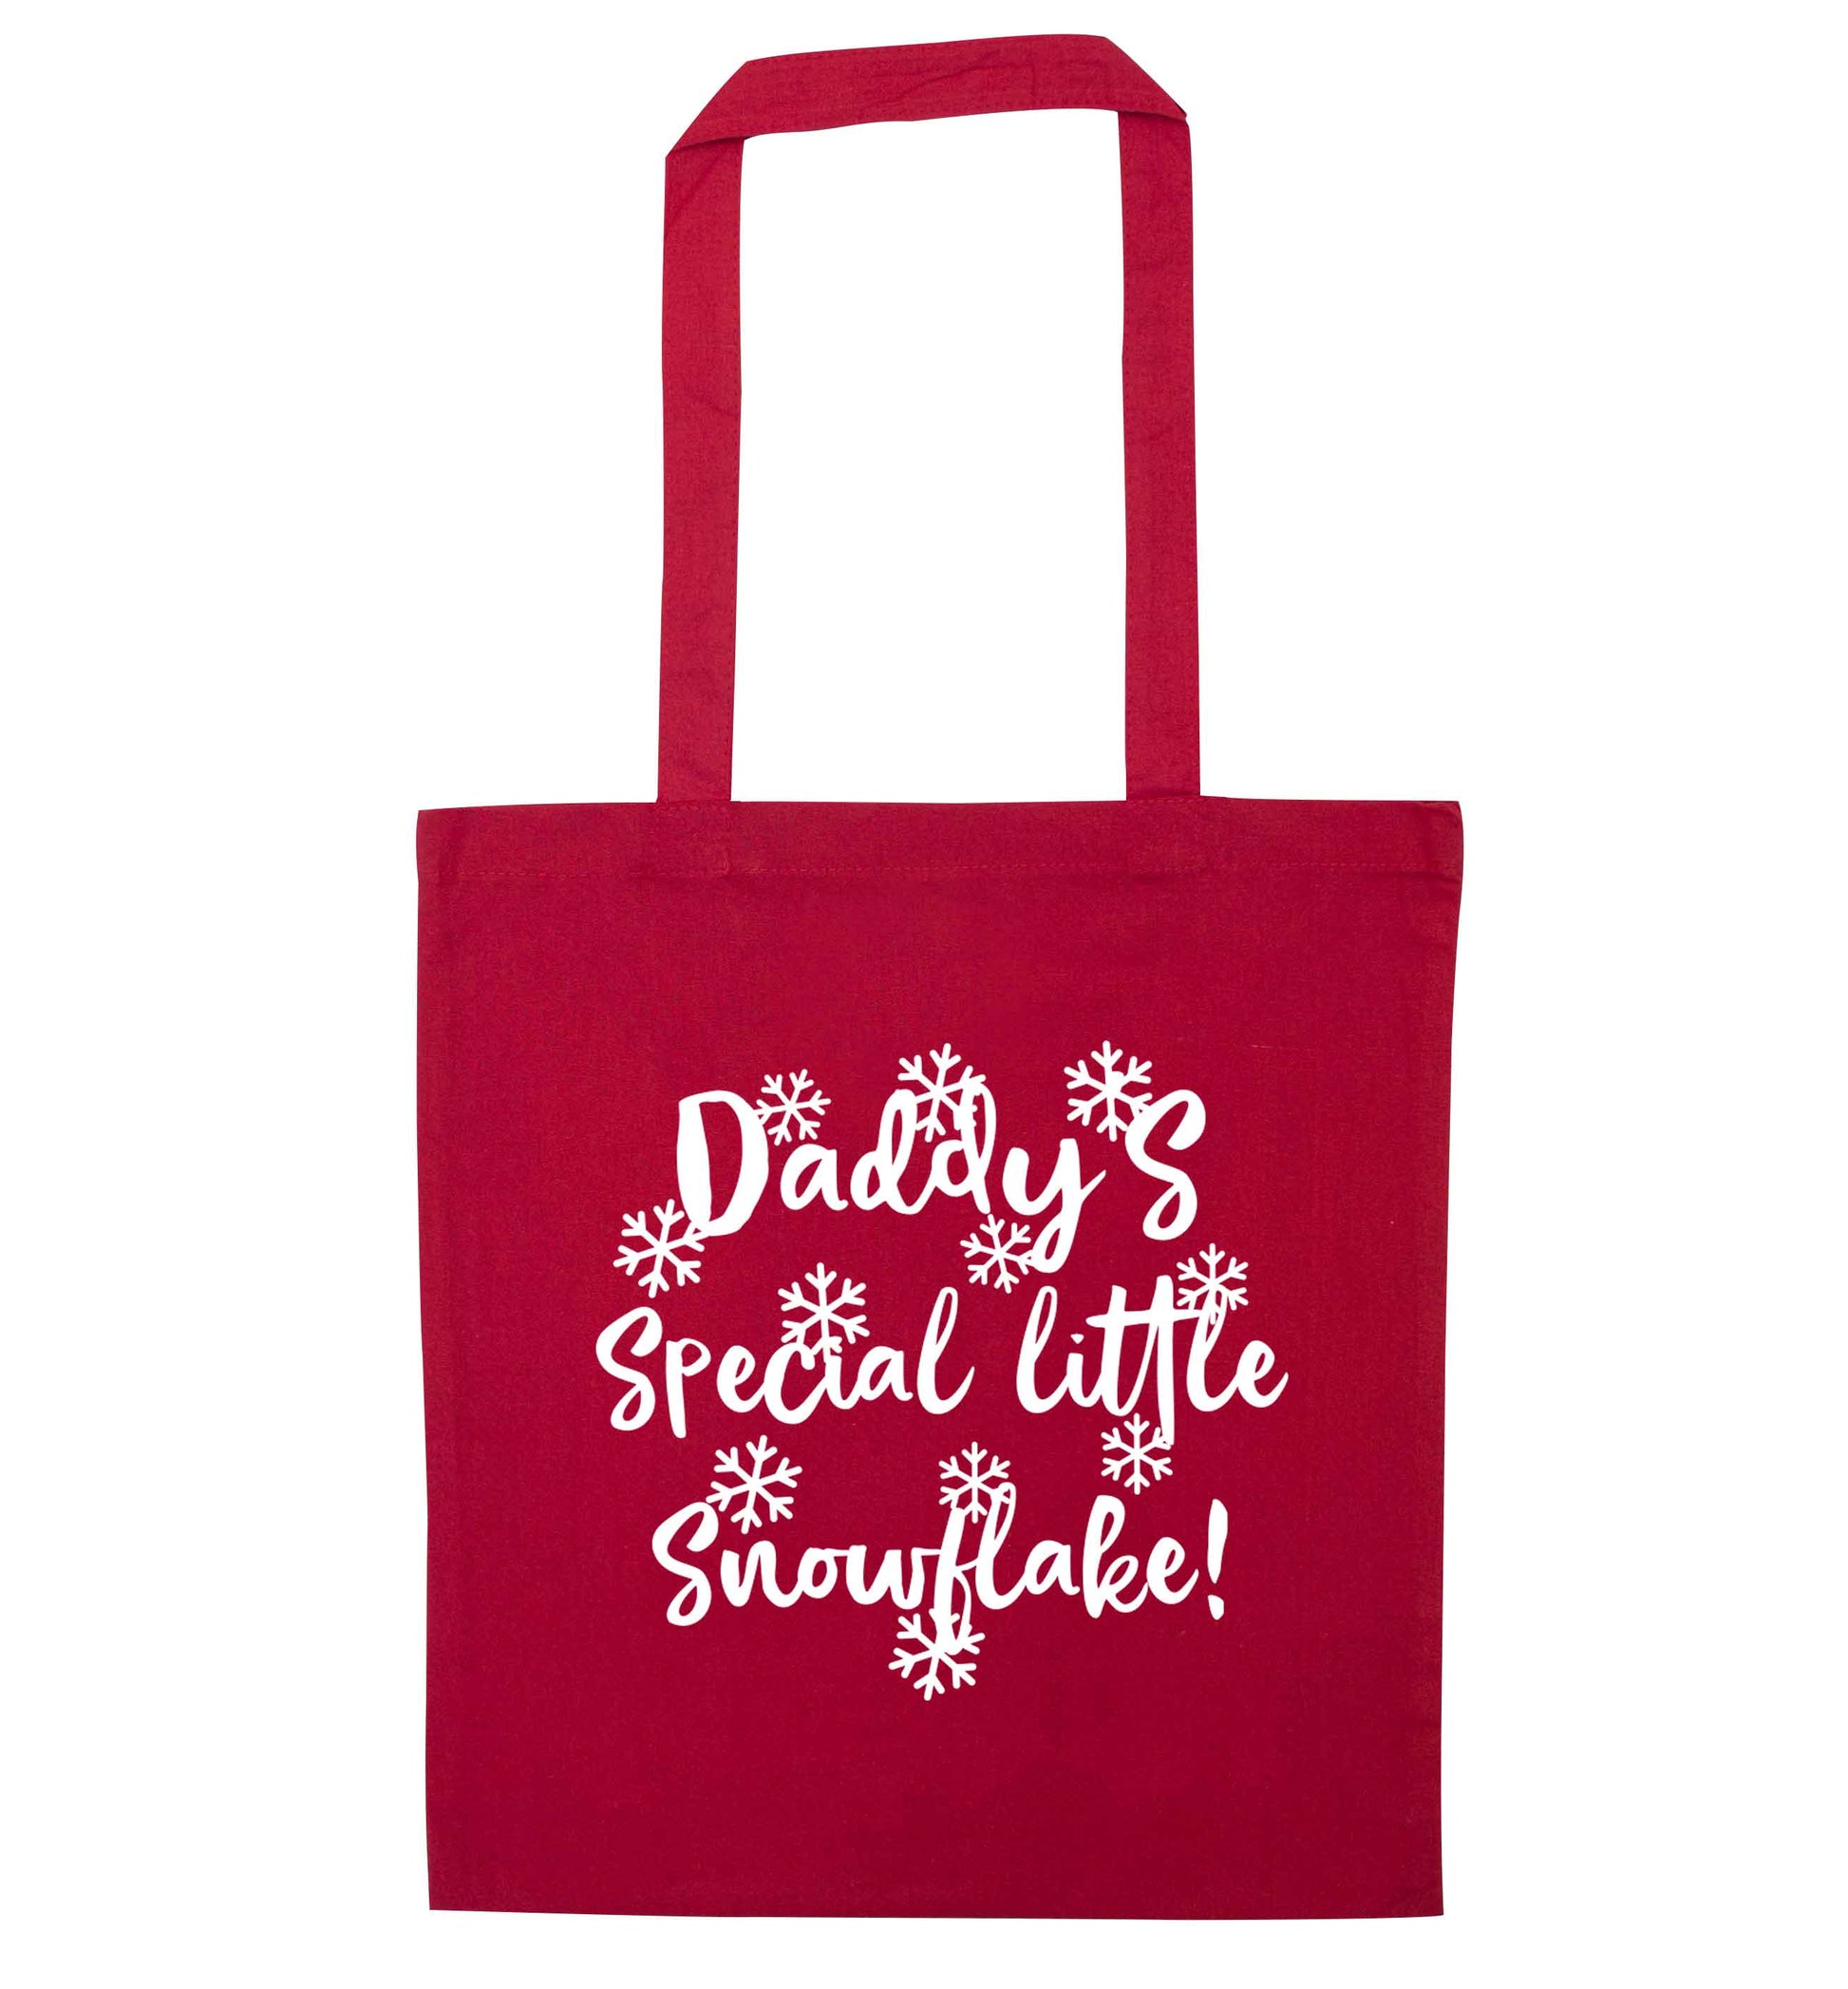 Daddy's special little snowflake red tote bag